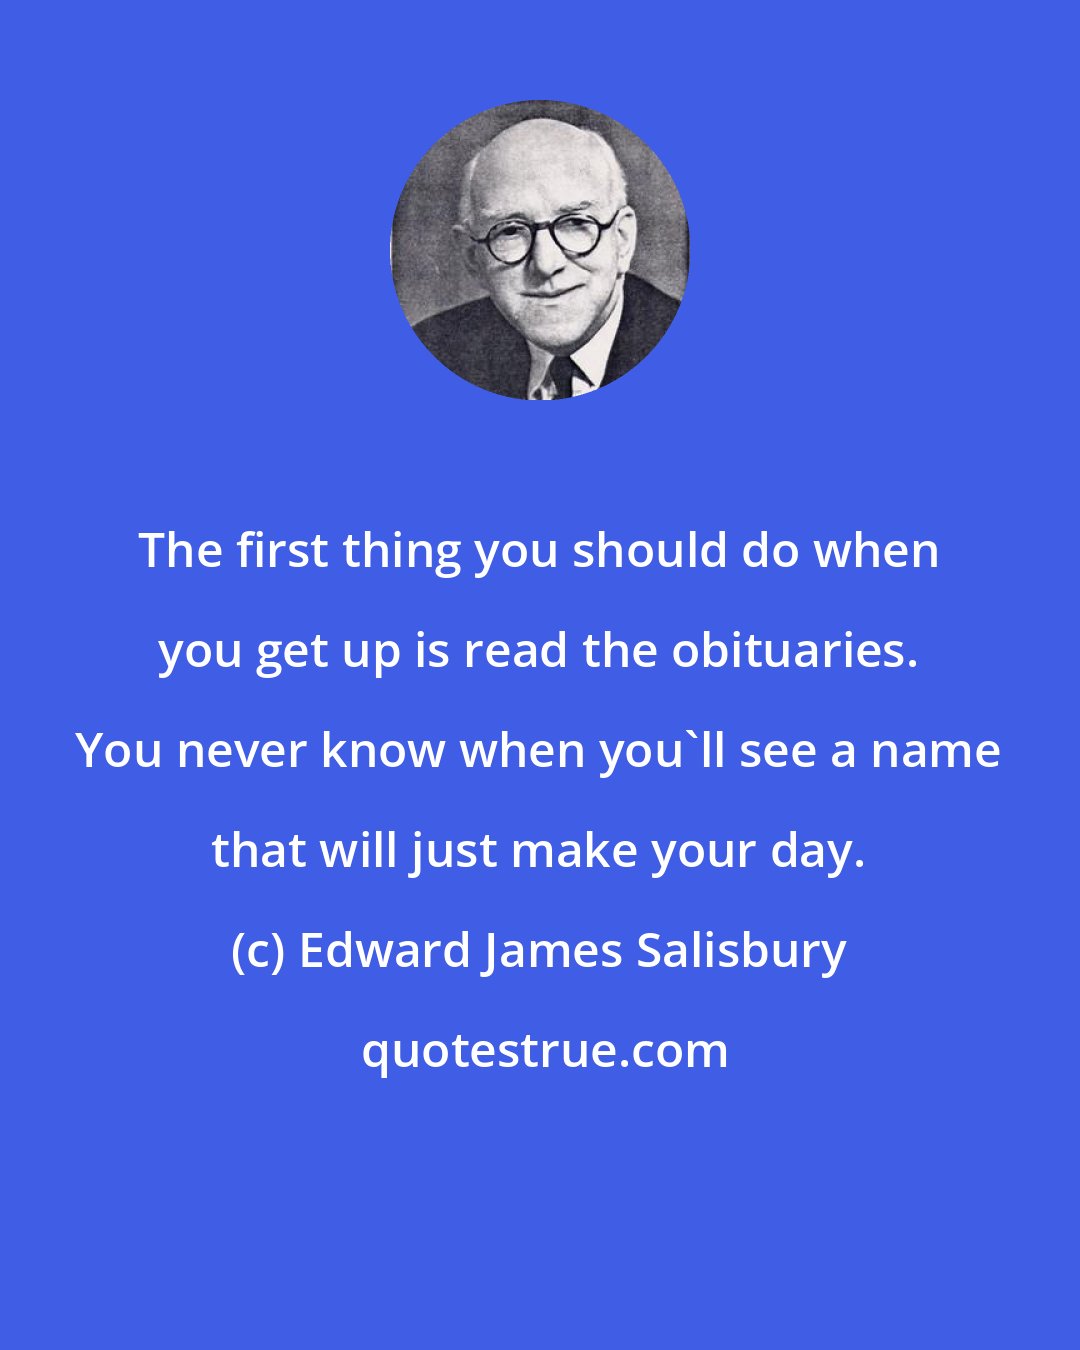 Edward James Salisbury: The first thing you should do when you get up is read the obituaries. You never know when you'll see a name that will just make your day.